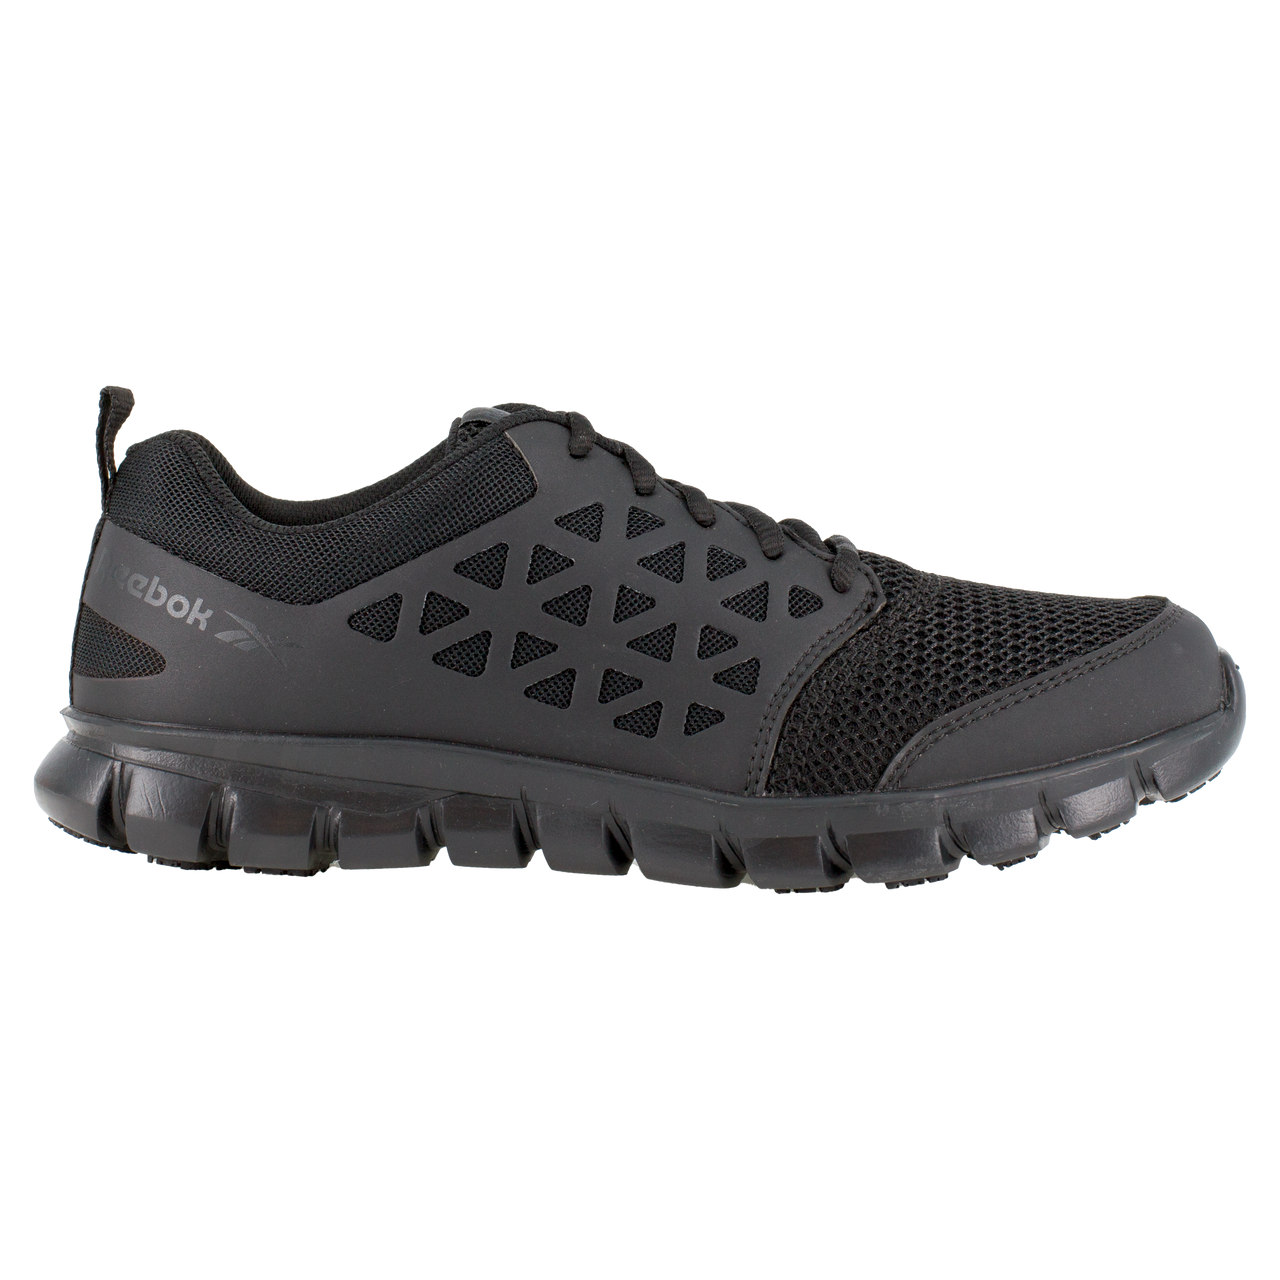 Reebok Sublite Cushion Athletic Work Shoes - RB4035